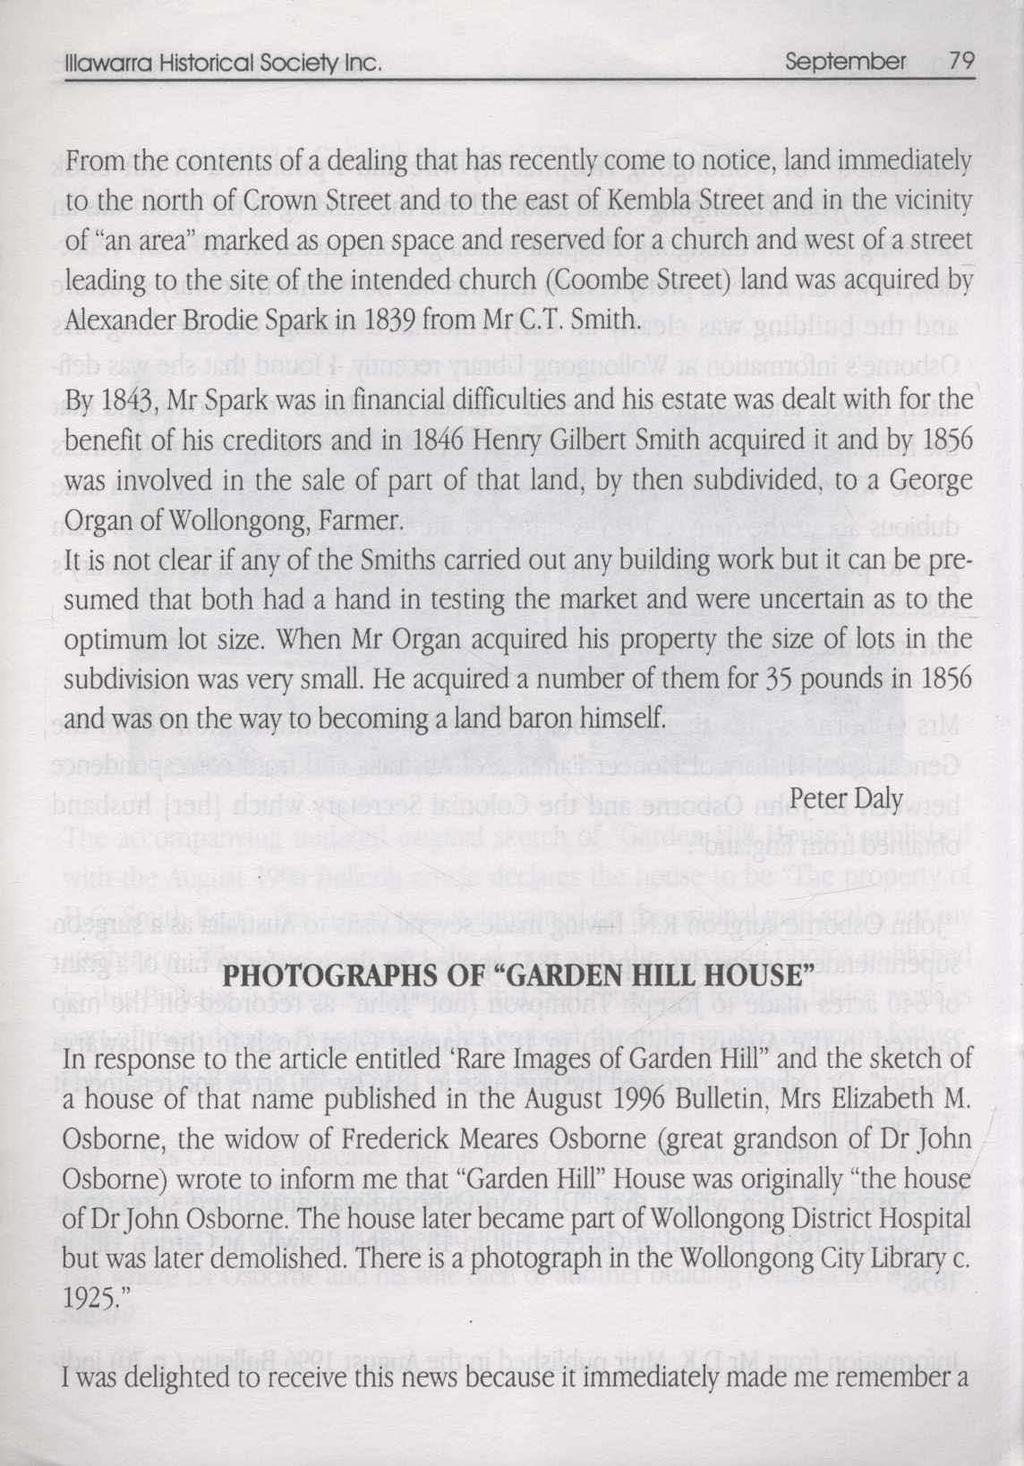 PHOTOGRAPHS OF "GARDEN HILL HOUSE" In response to the article entitled 'Rare Images of Garden Hill" and the sketch of a house of that name published in the August 1996 Bulletin. Mrs Elizabeth M.